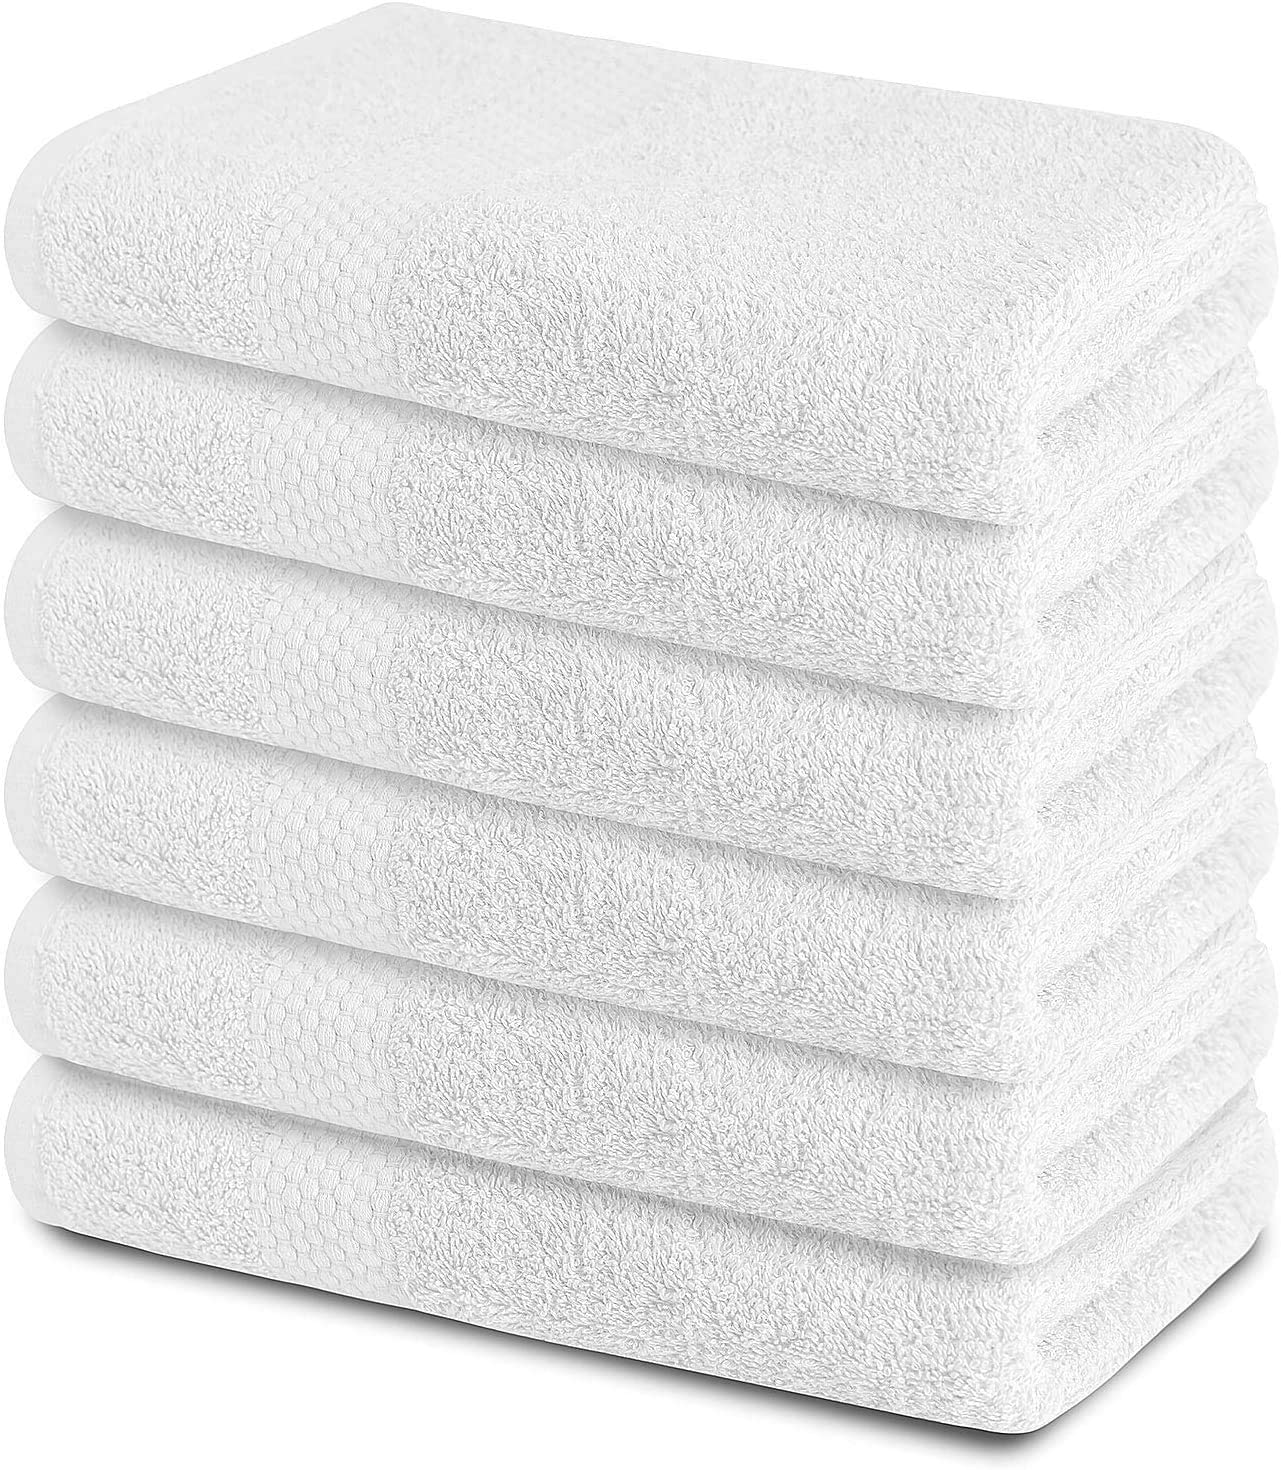 Bath Towels 22 X 44 Inches - Set of 6 Ultra Soft 100% Combed Cotton Pink Towels - Highly Absorbent Daily Usage Bath Towel Set Ideal for Pool, Home, Gym, Spa, Hotel - (Pink)